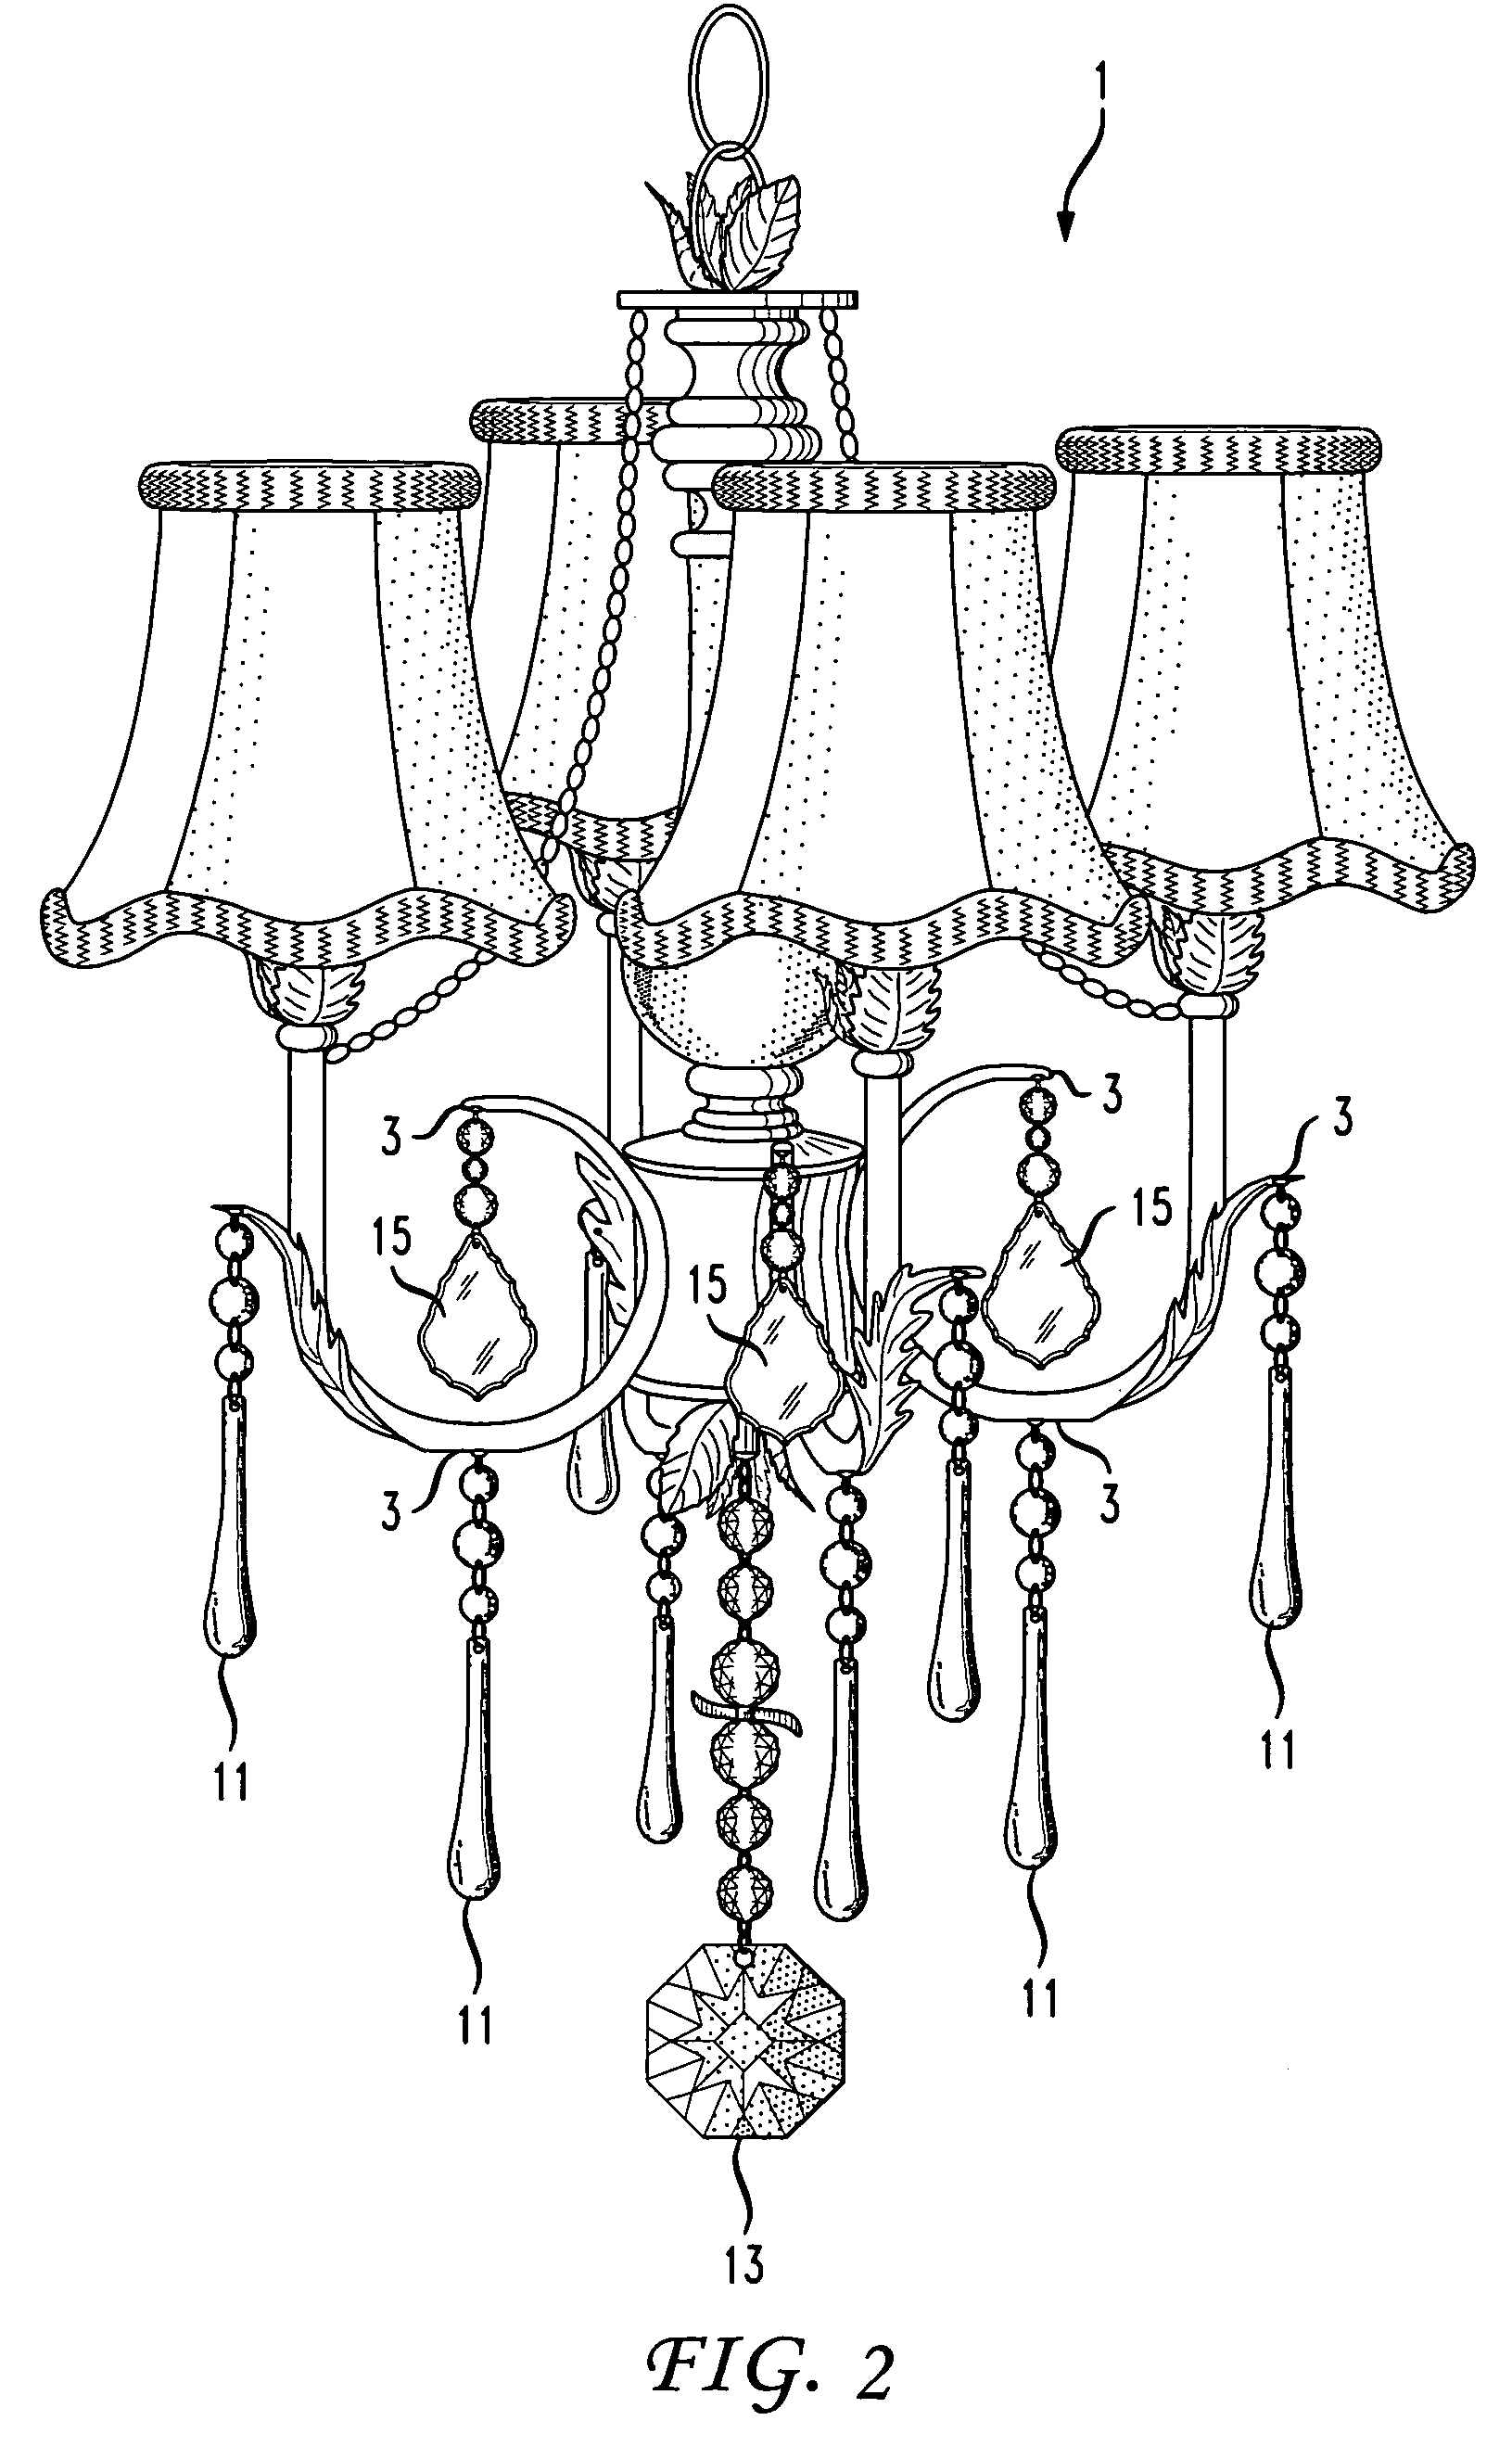 Interchangeable adornments for chandeliers and the like